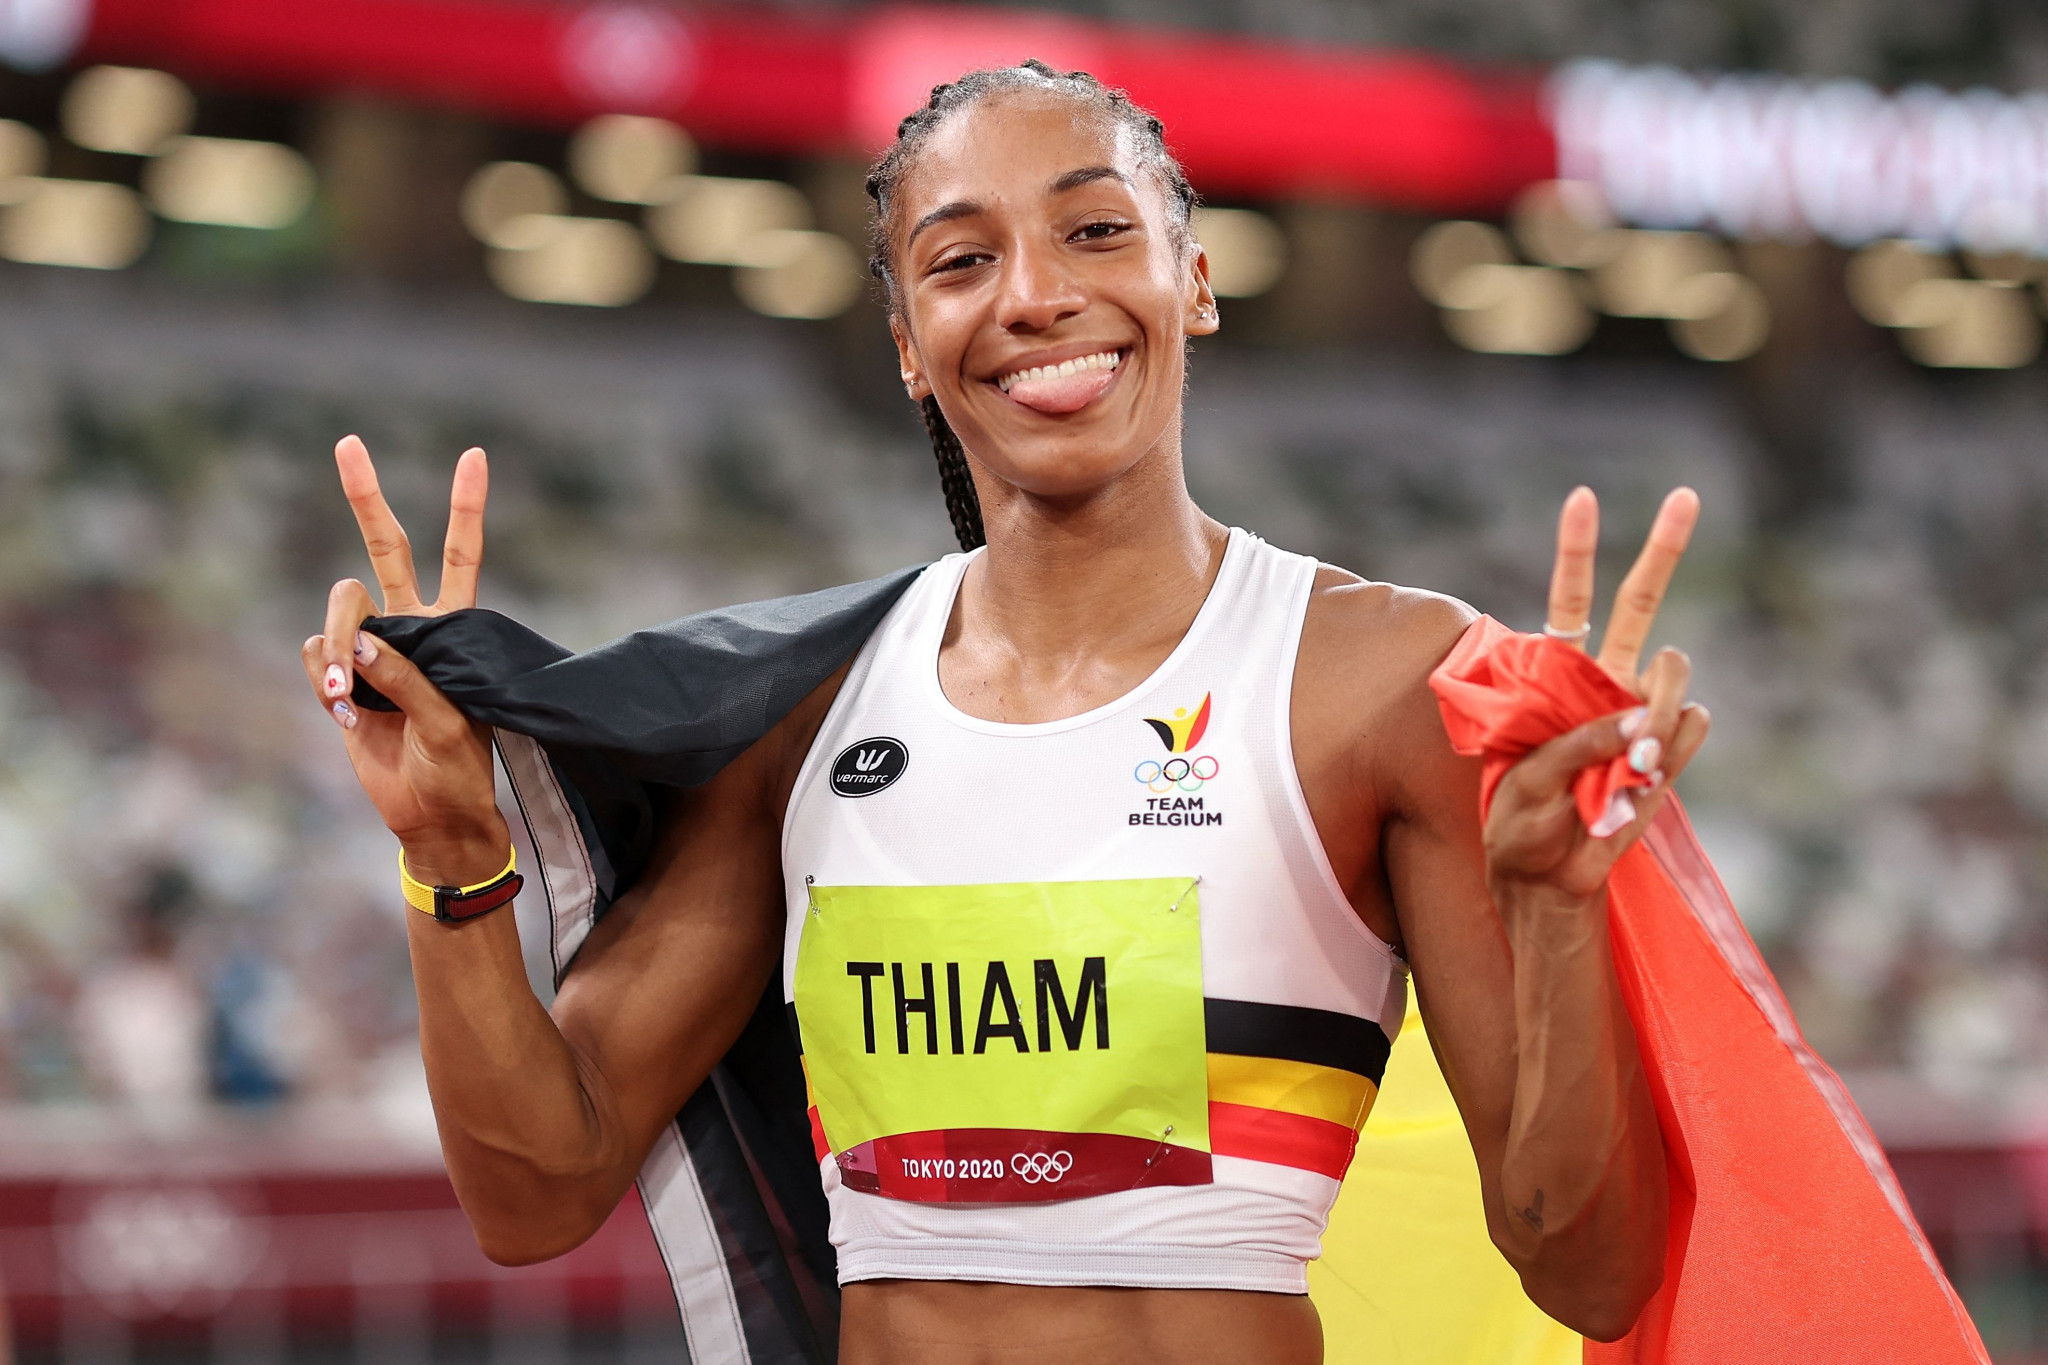 There was also a gold medal for Belgium in athletics as Nafi Thiam won the heptathlon ©Getty Images